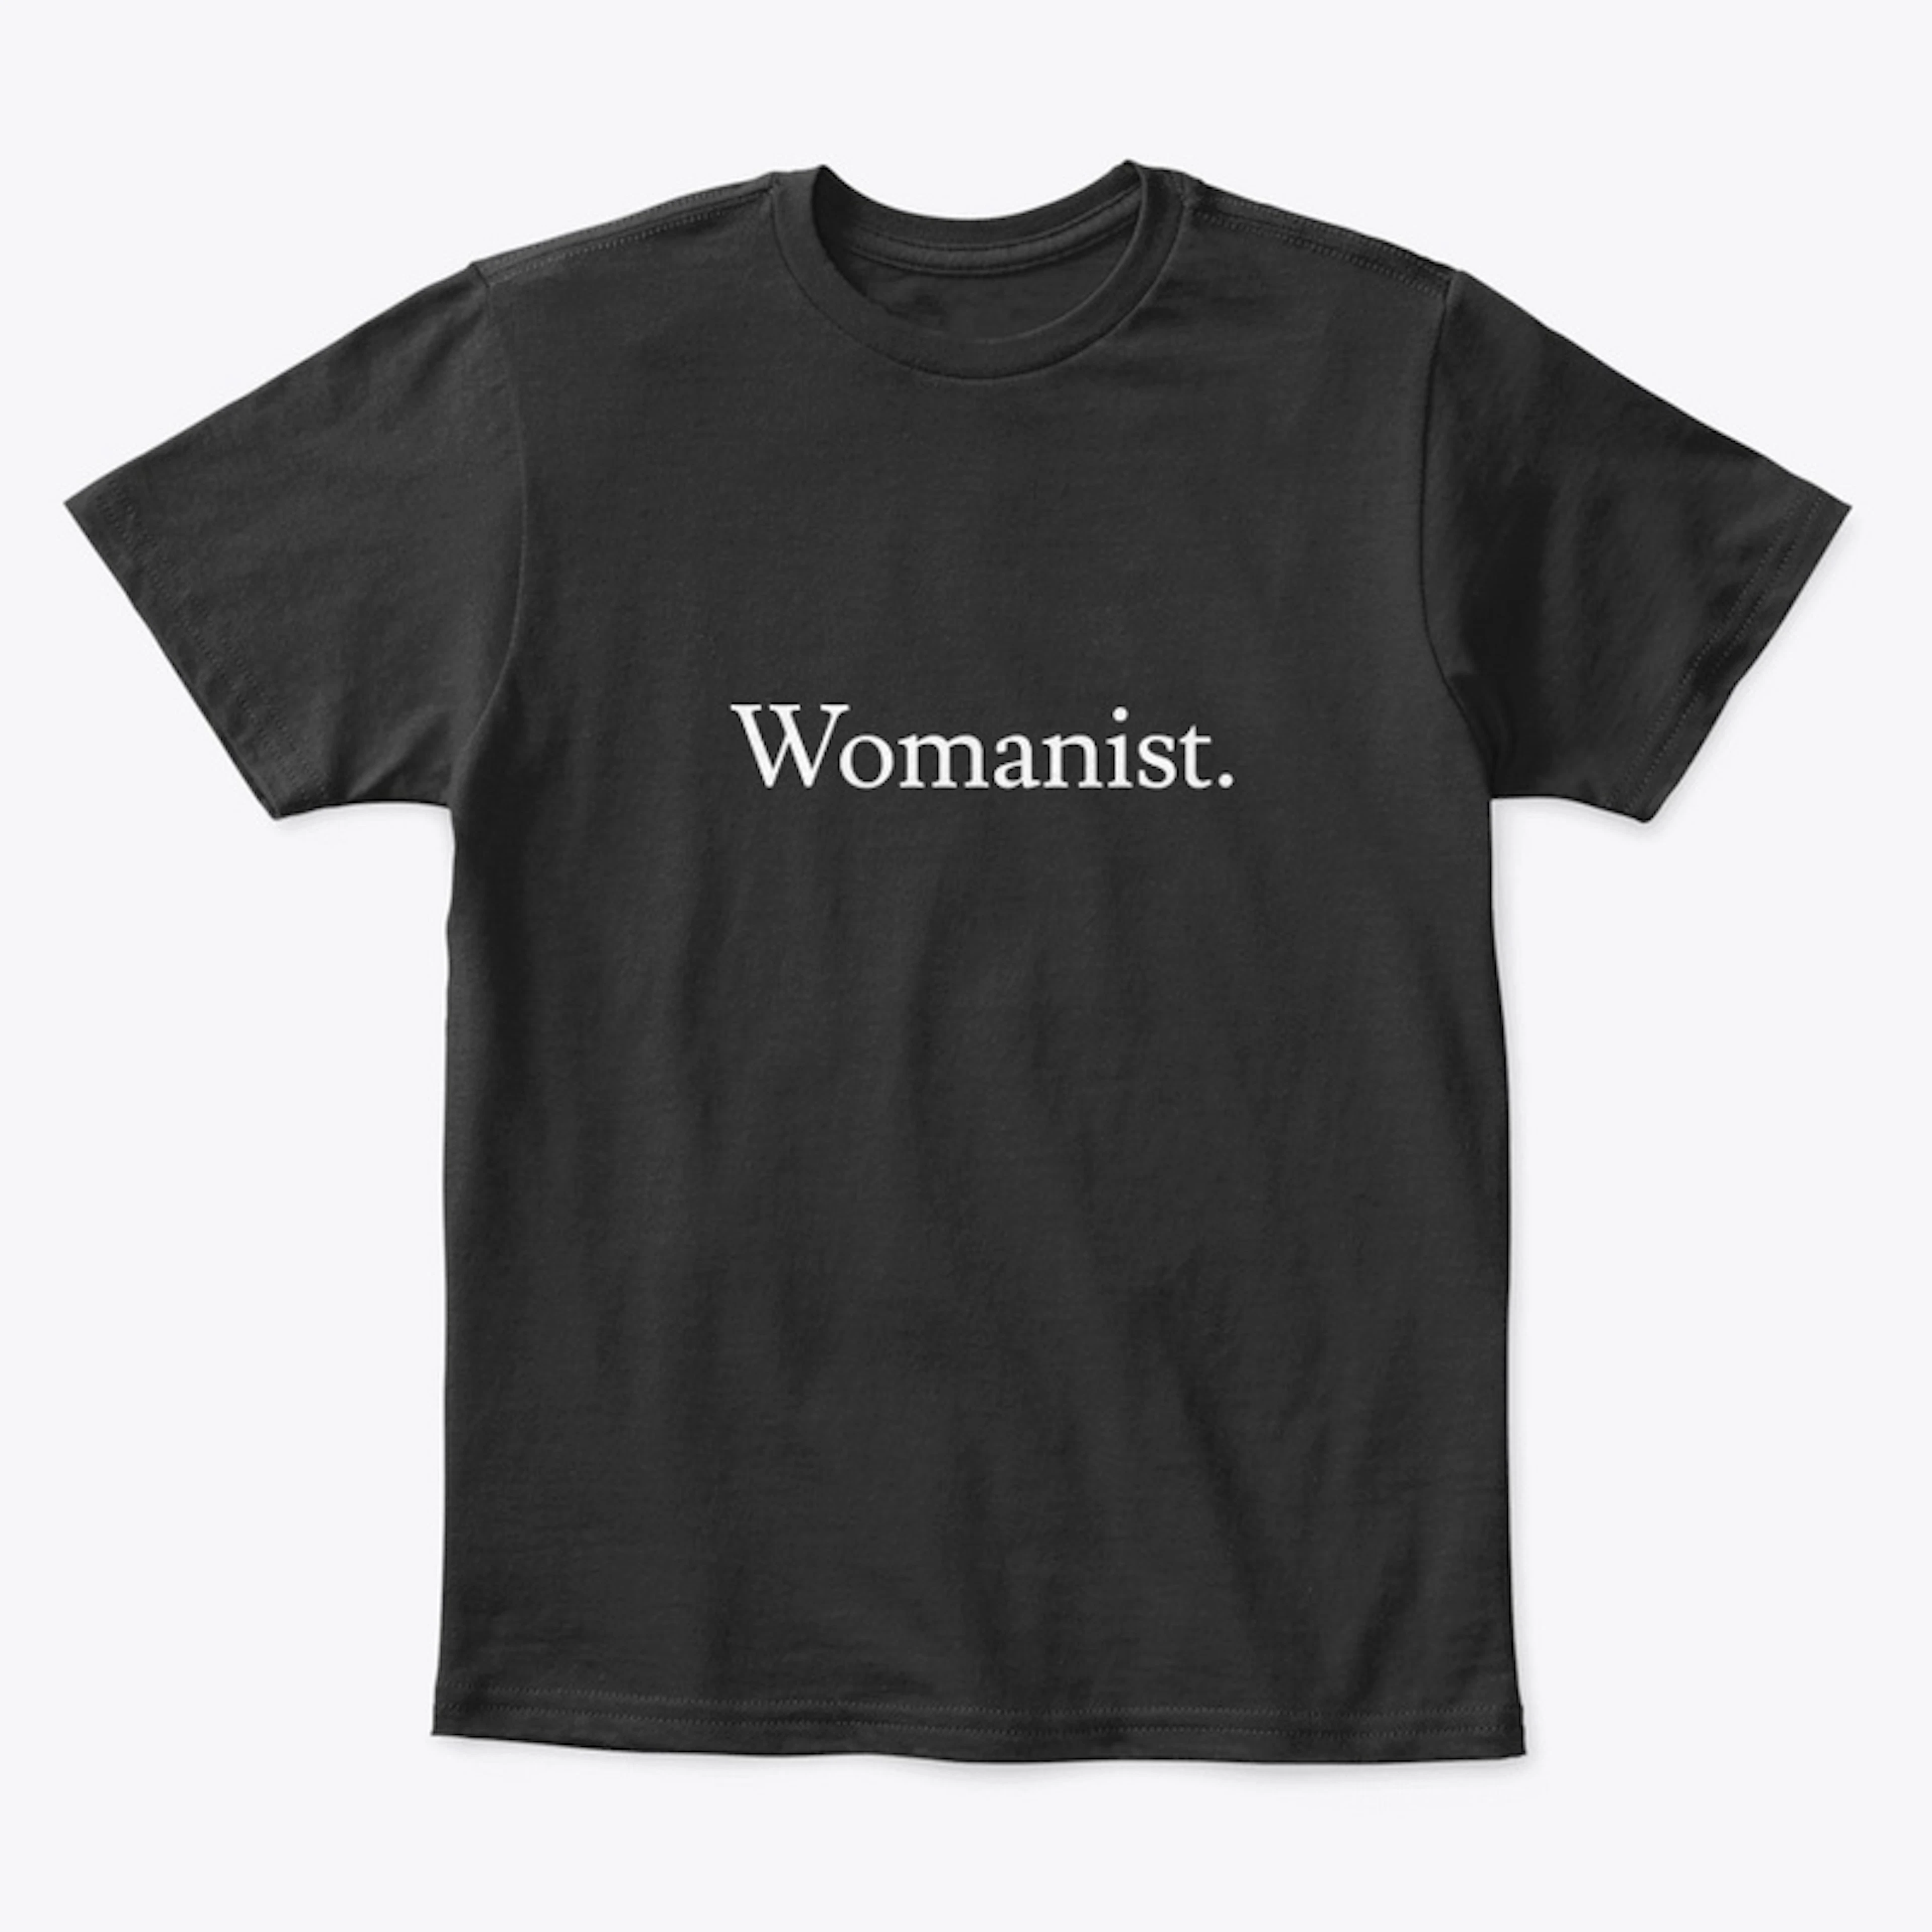 Womanist